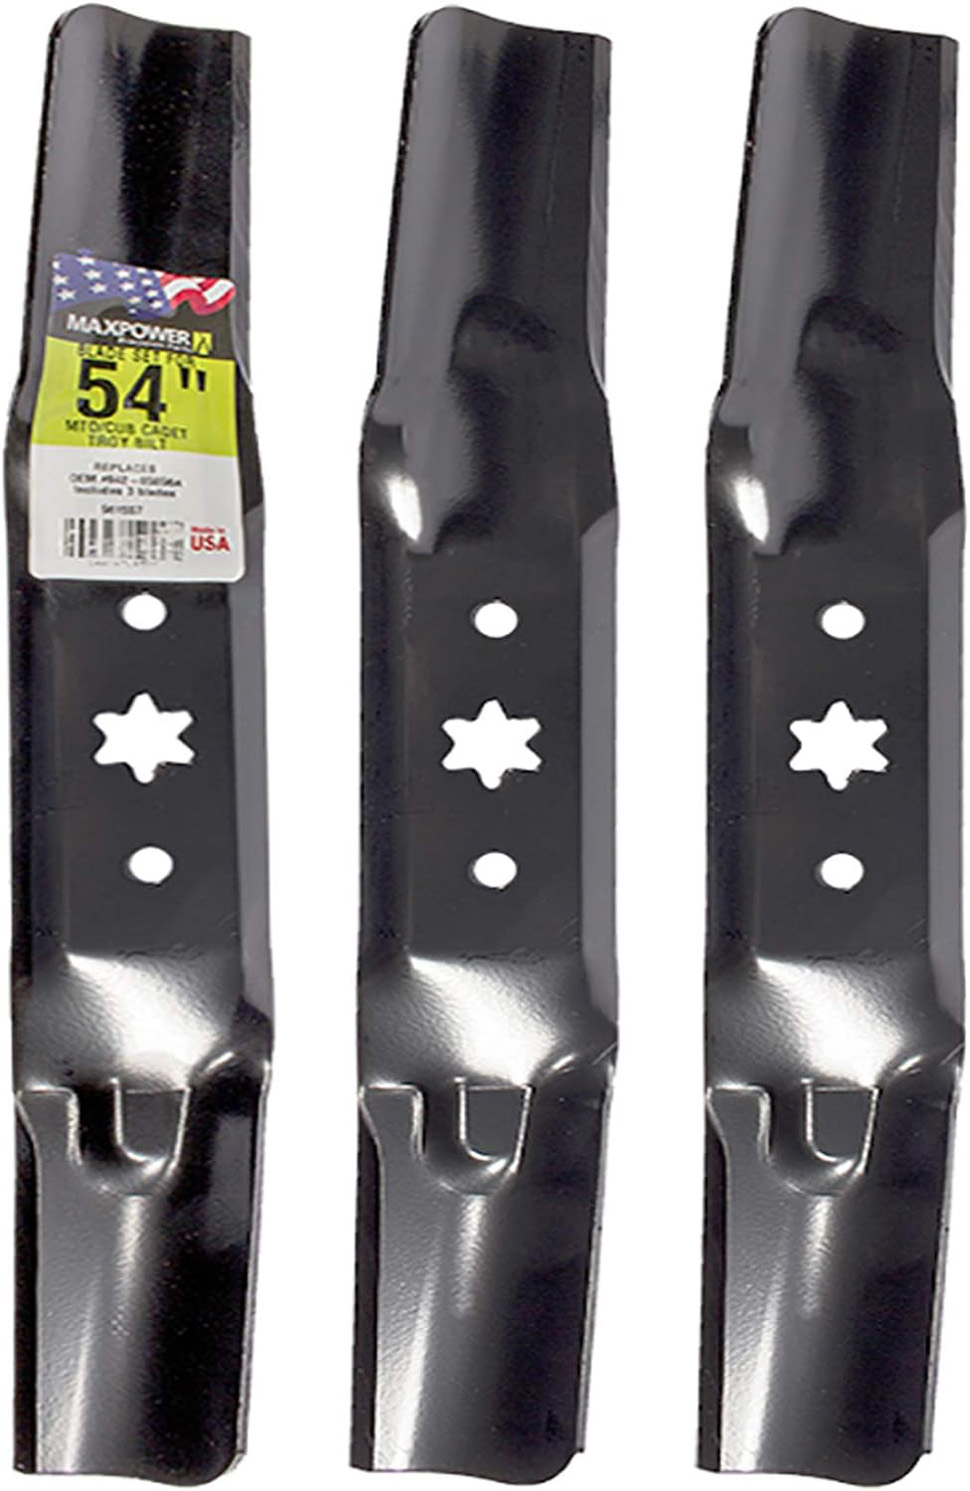 MaxPower 561557B 3 Blade Set for Many 54 in. Cut MTD